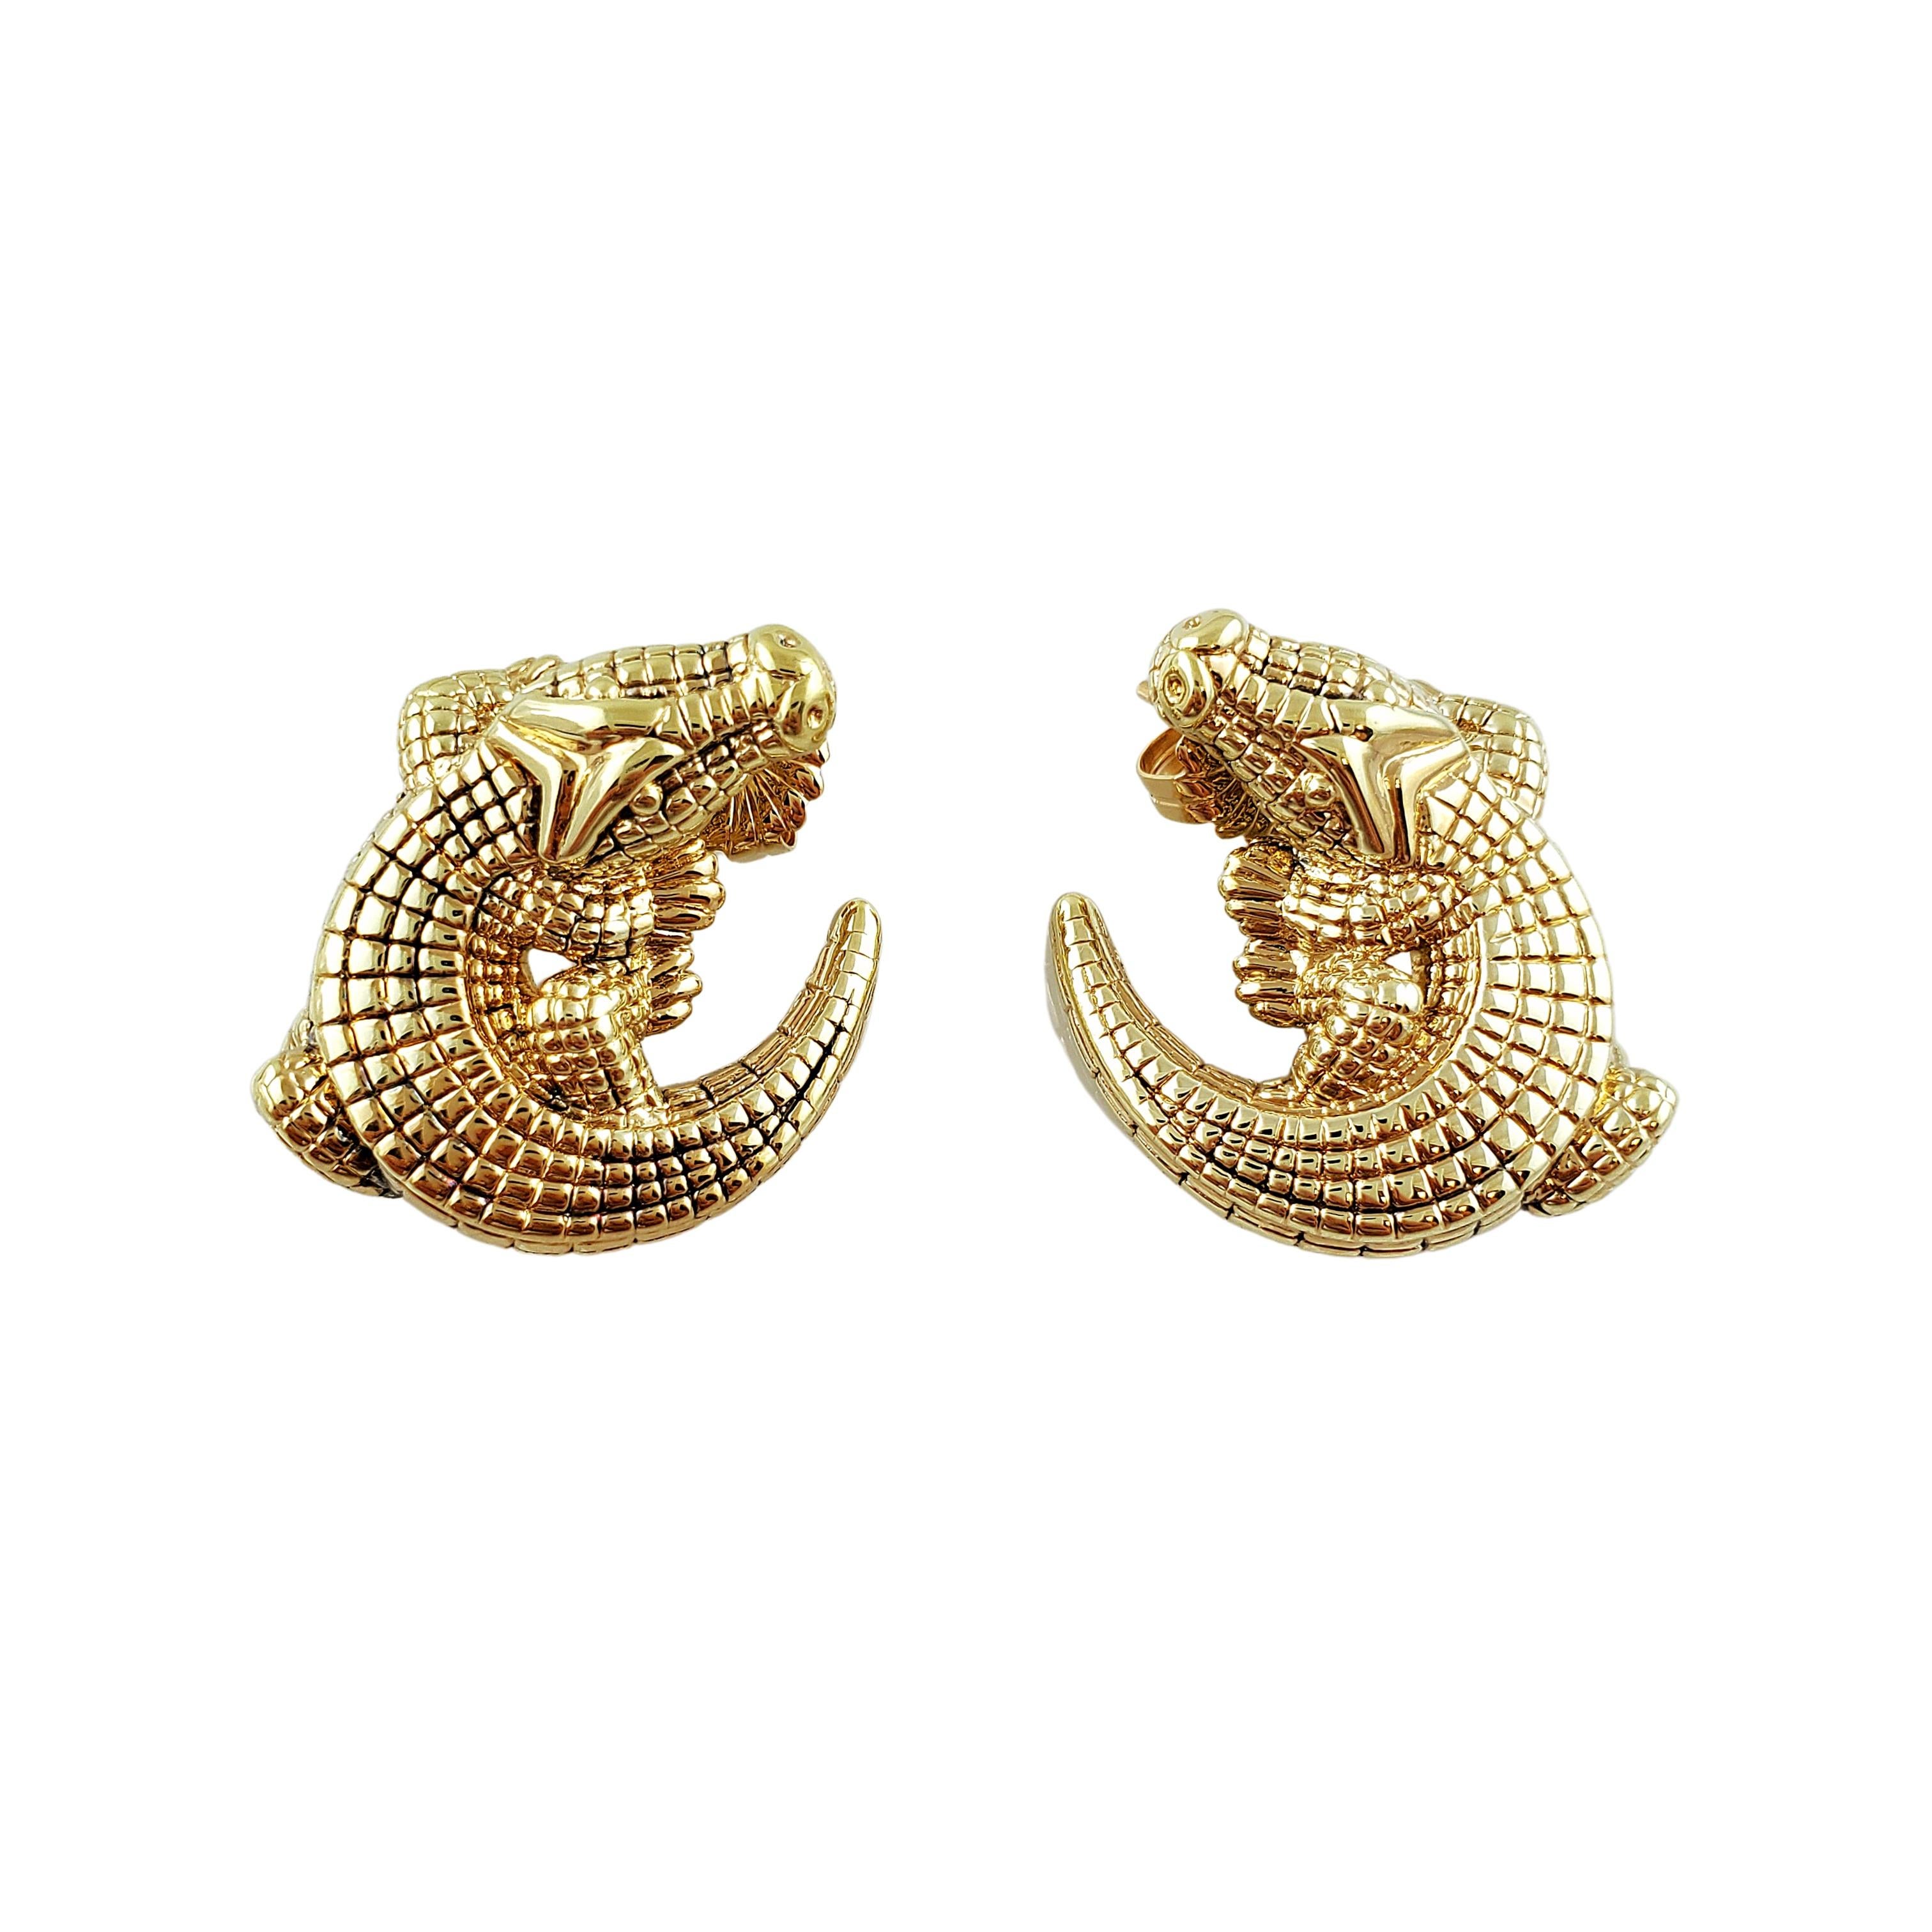 Vintage 14K Yellow Gold Carla Alligator Earrings

Beautiful 3D 14K yellow gold Carla alligator earrings radiate in life like detail. These stunning and unique earrings can be a statement piece to any outfit!

Size: 28mm X 24mm X 6mm

Weight: 9.3 gr